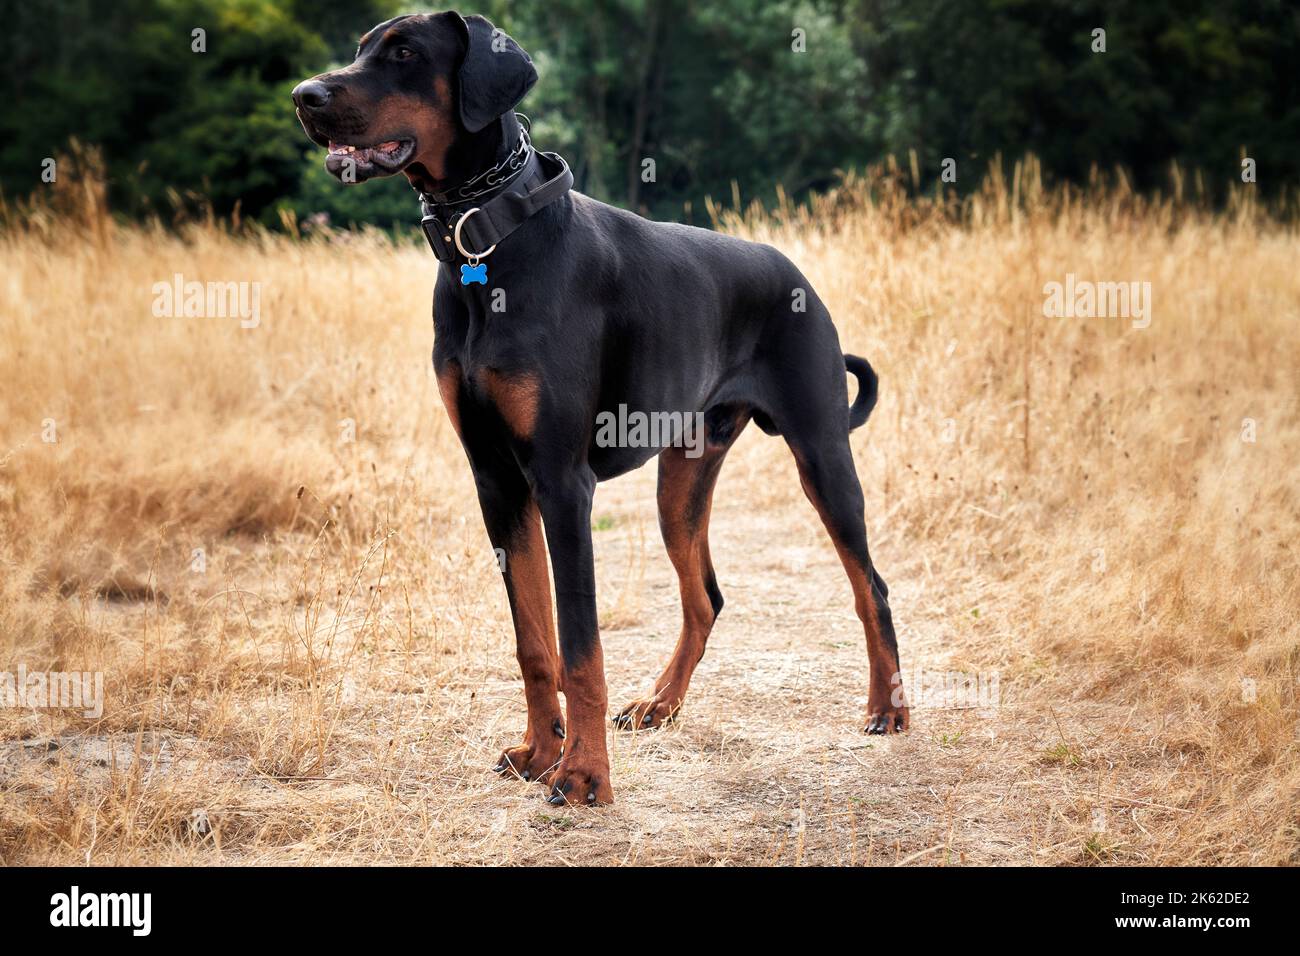 Doberman puppy dog standing alert in a field while on a walk Stock Photo